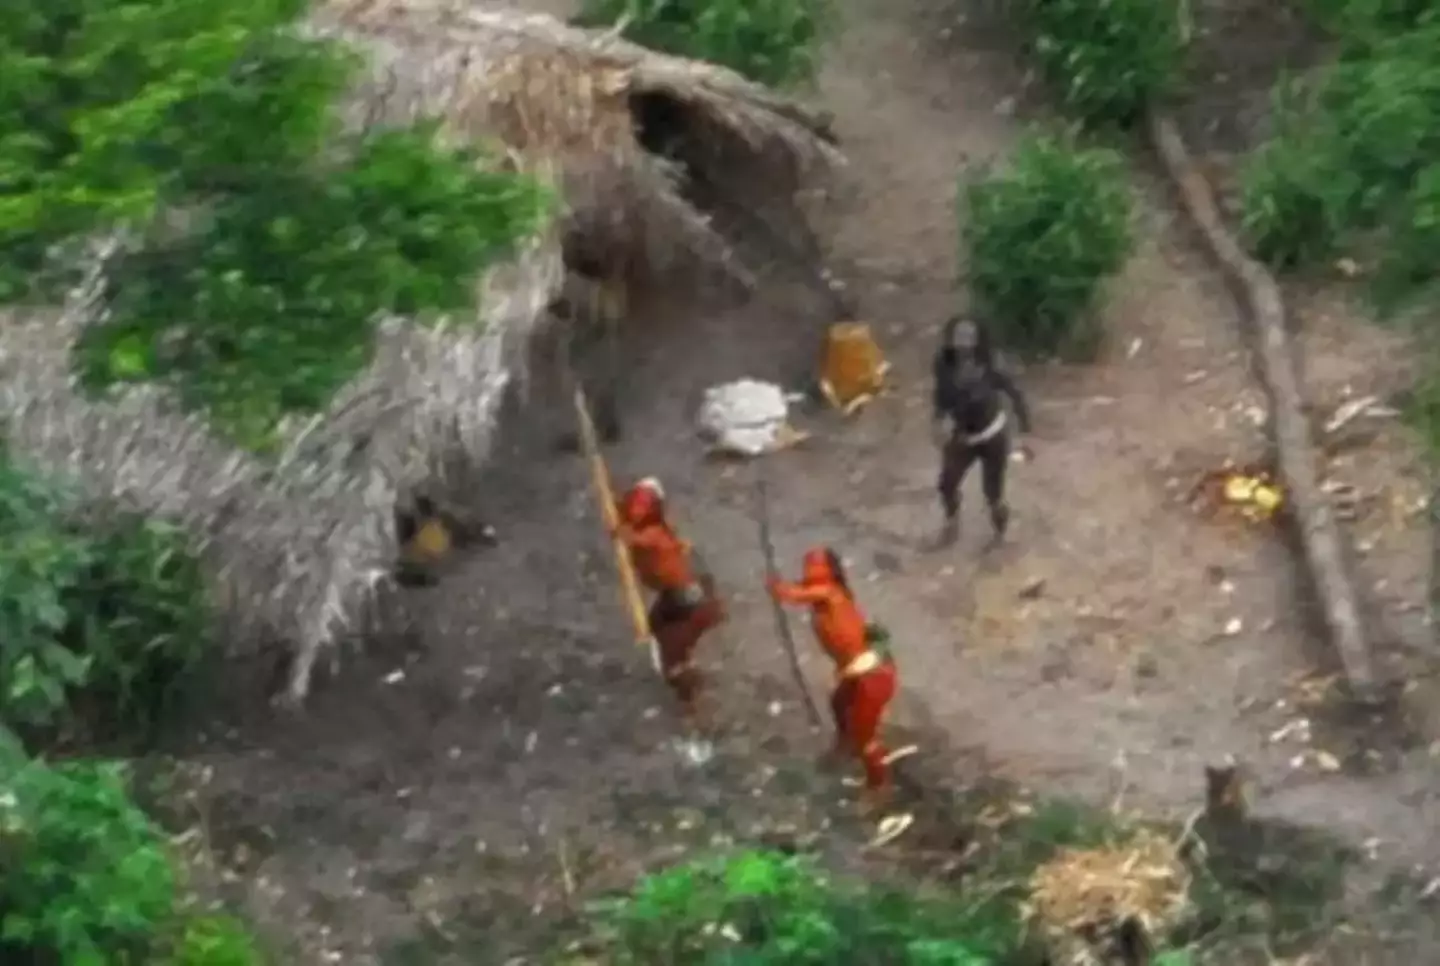 The pictures of the uncontacted tribespeople of Brazil were taken in 2008.